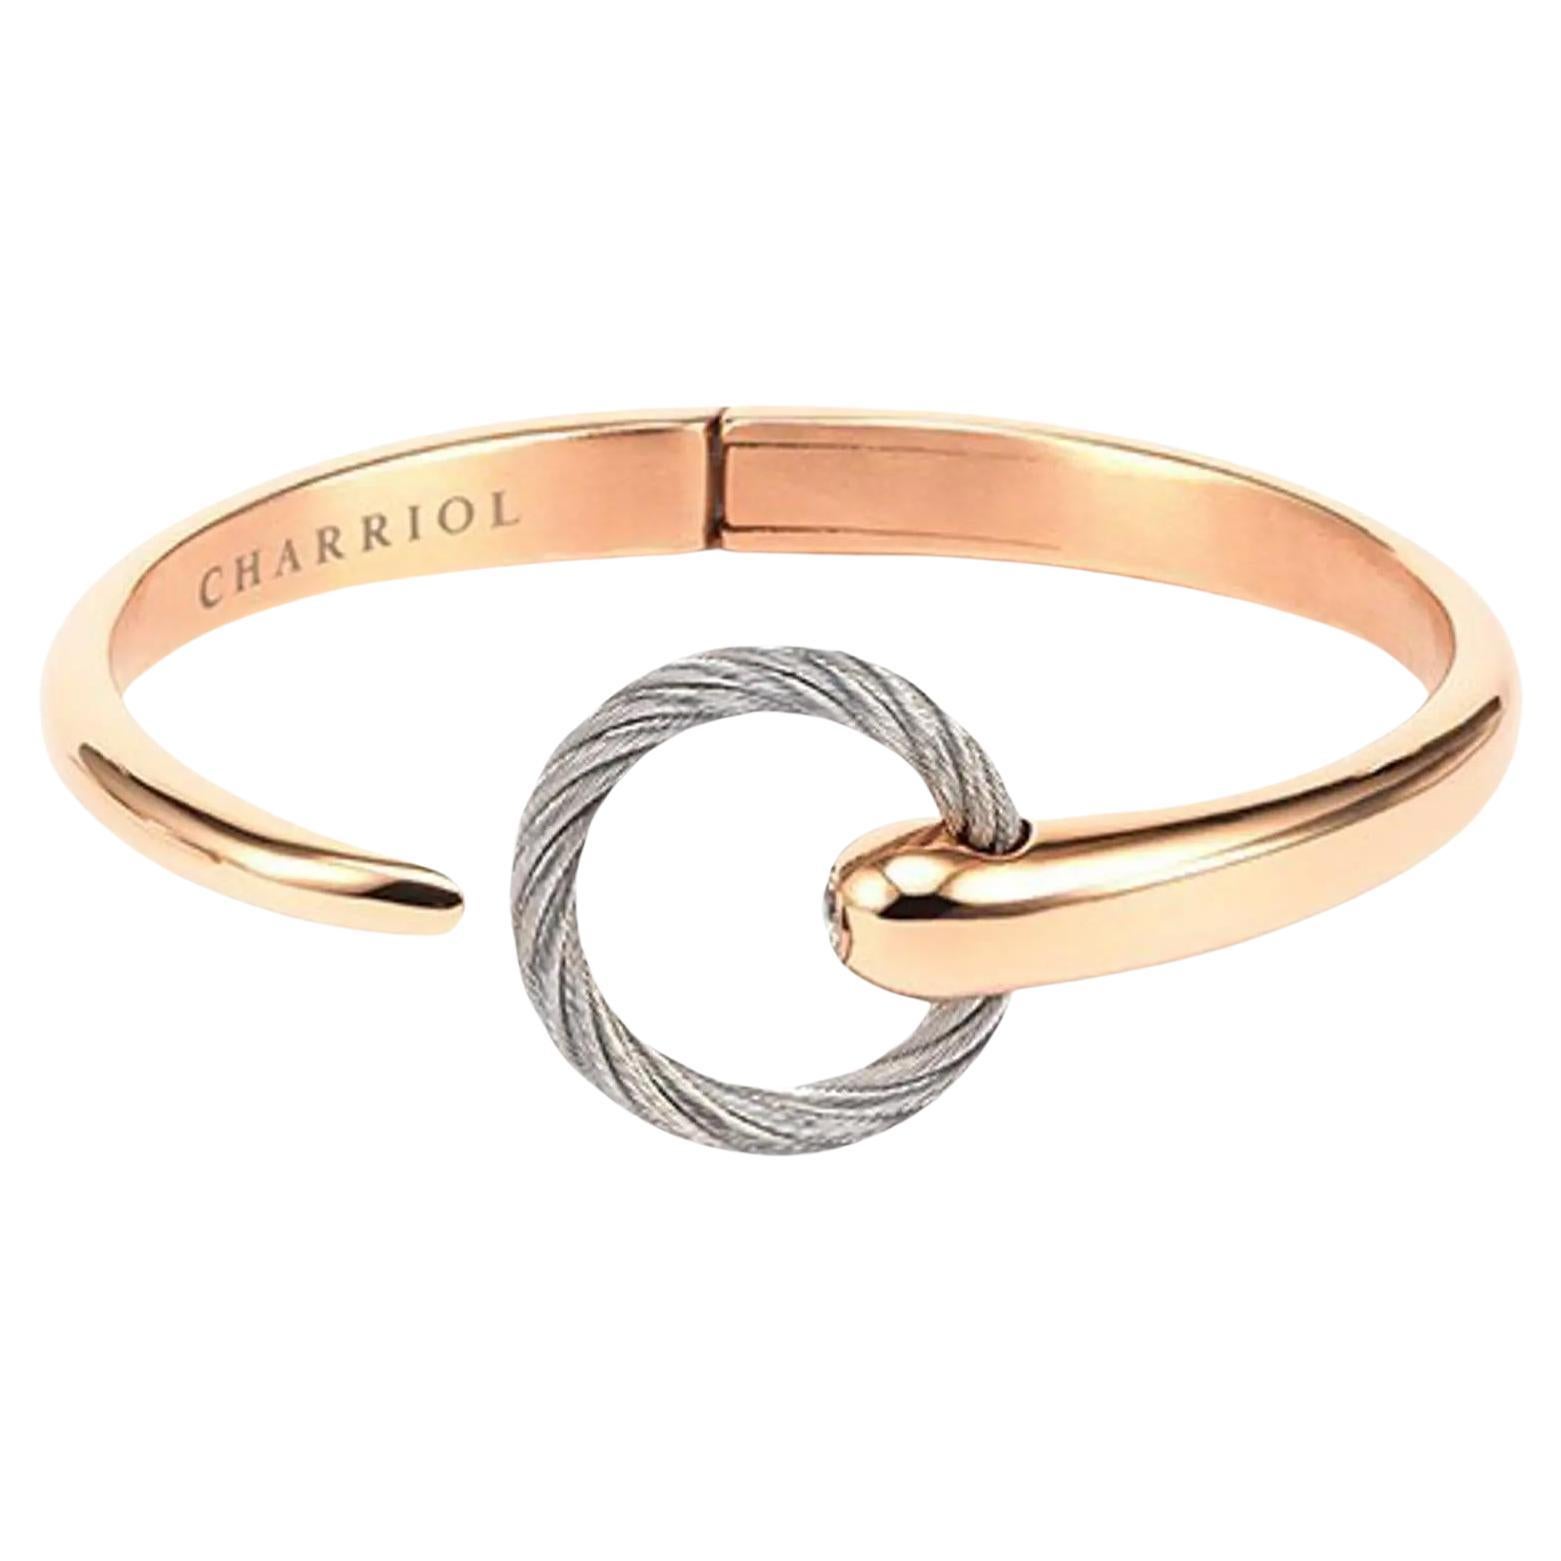 Charriol Infinity Zen Rose Gold PVD Steel Cable Bangle 04-102-1232-0 Size M For Sale